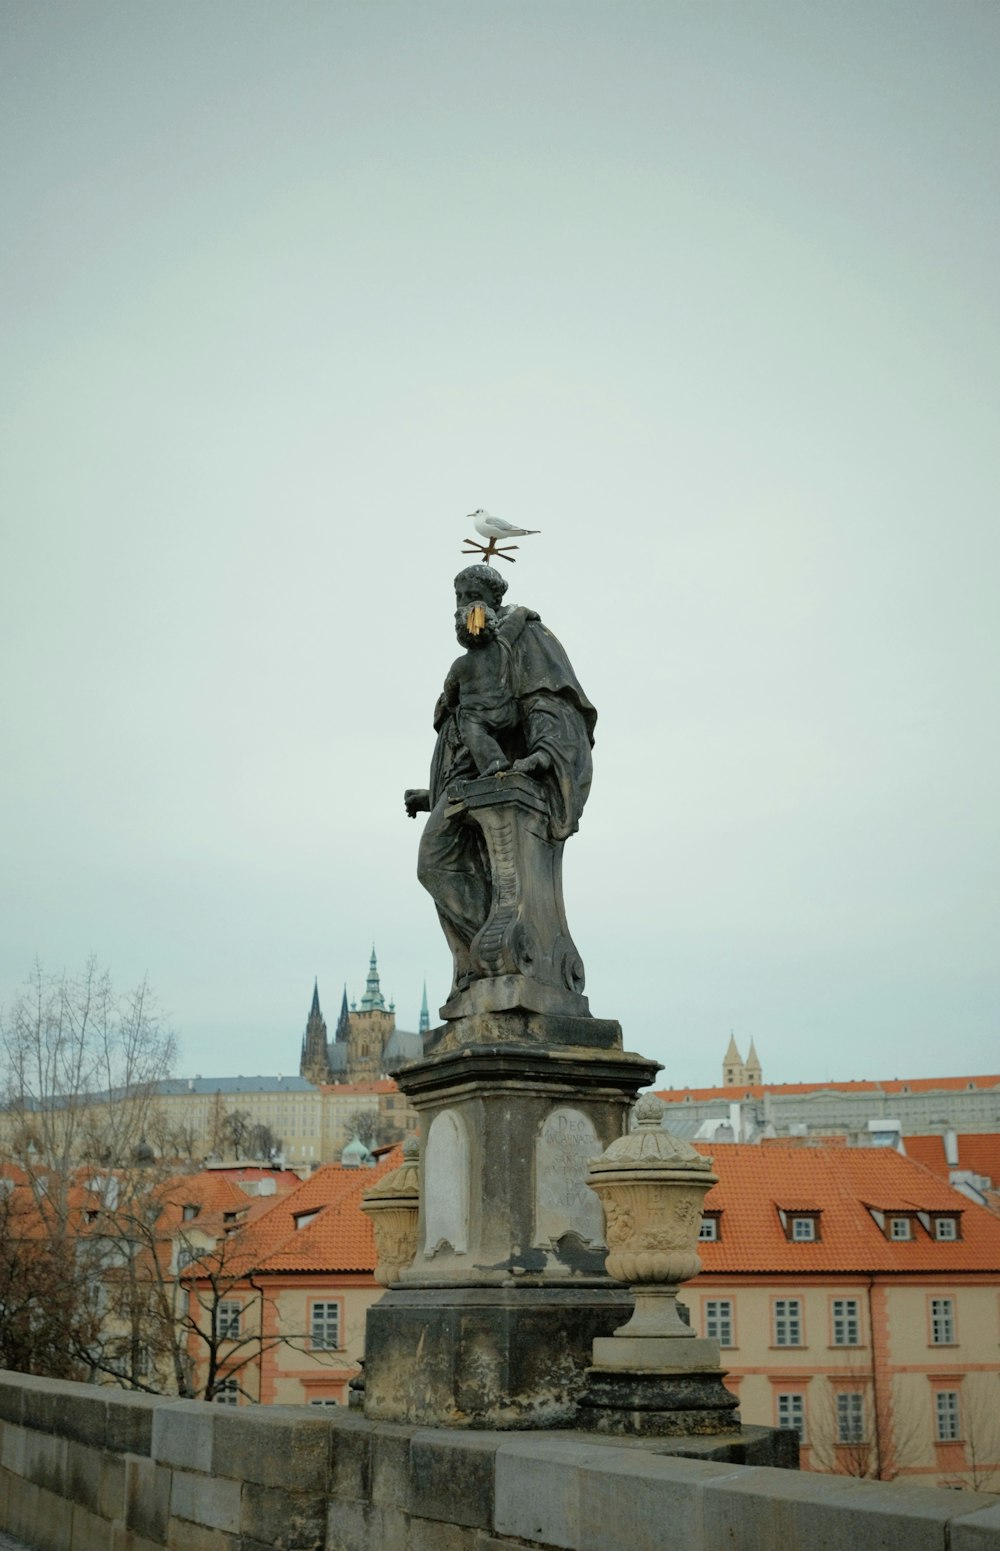 a statue of a man with a bird on his head